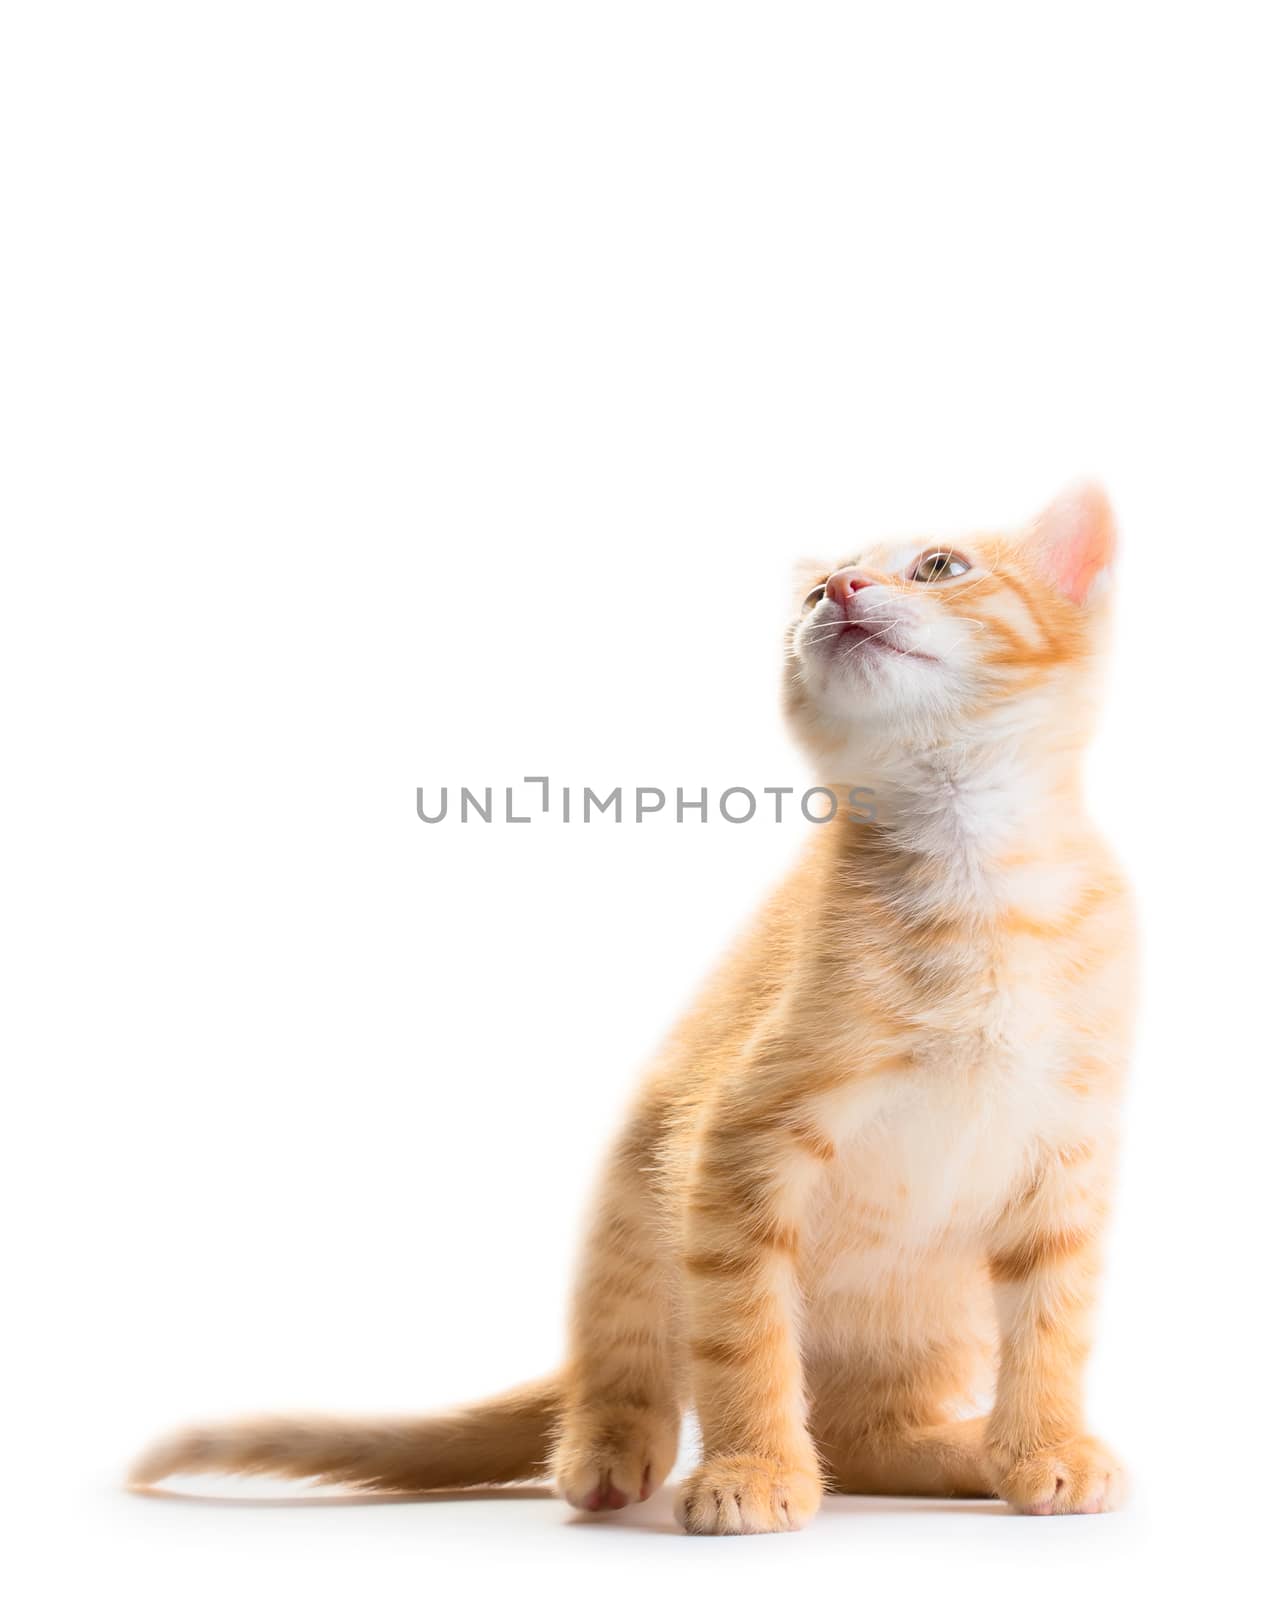 Red cute little kitten isolated on white background